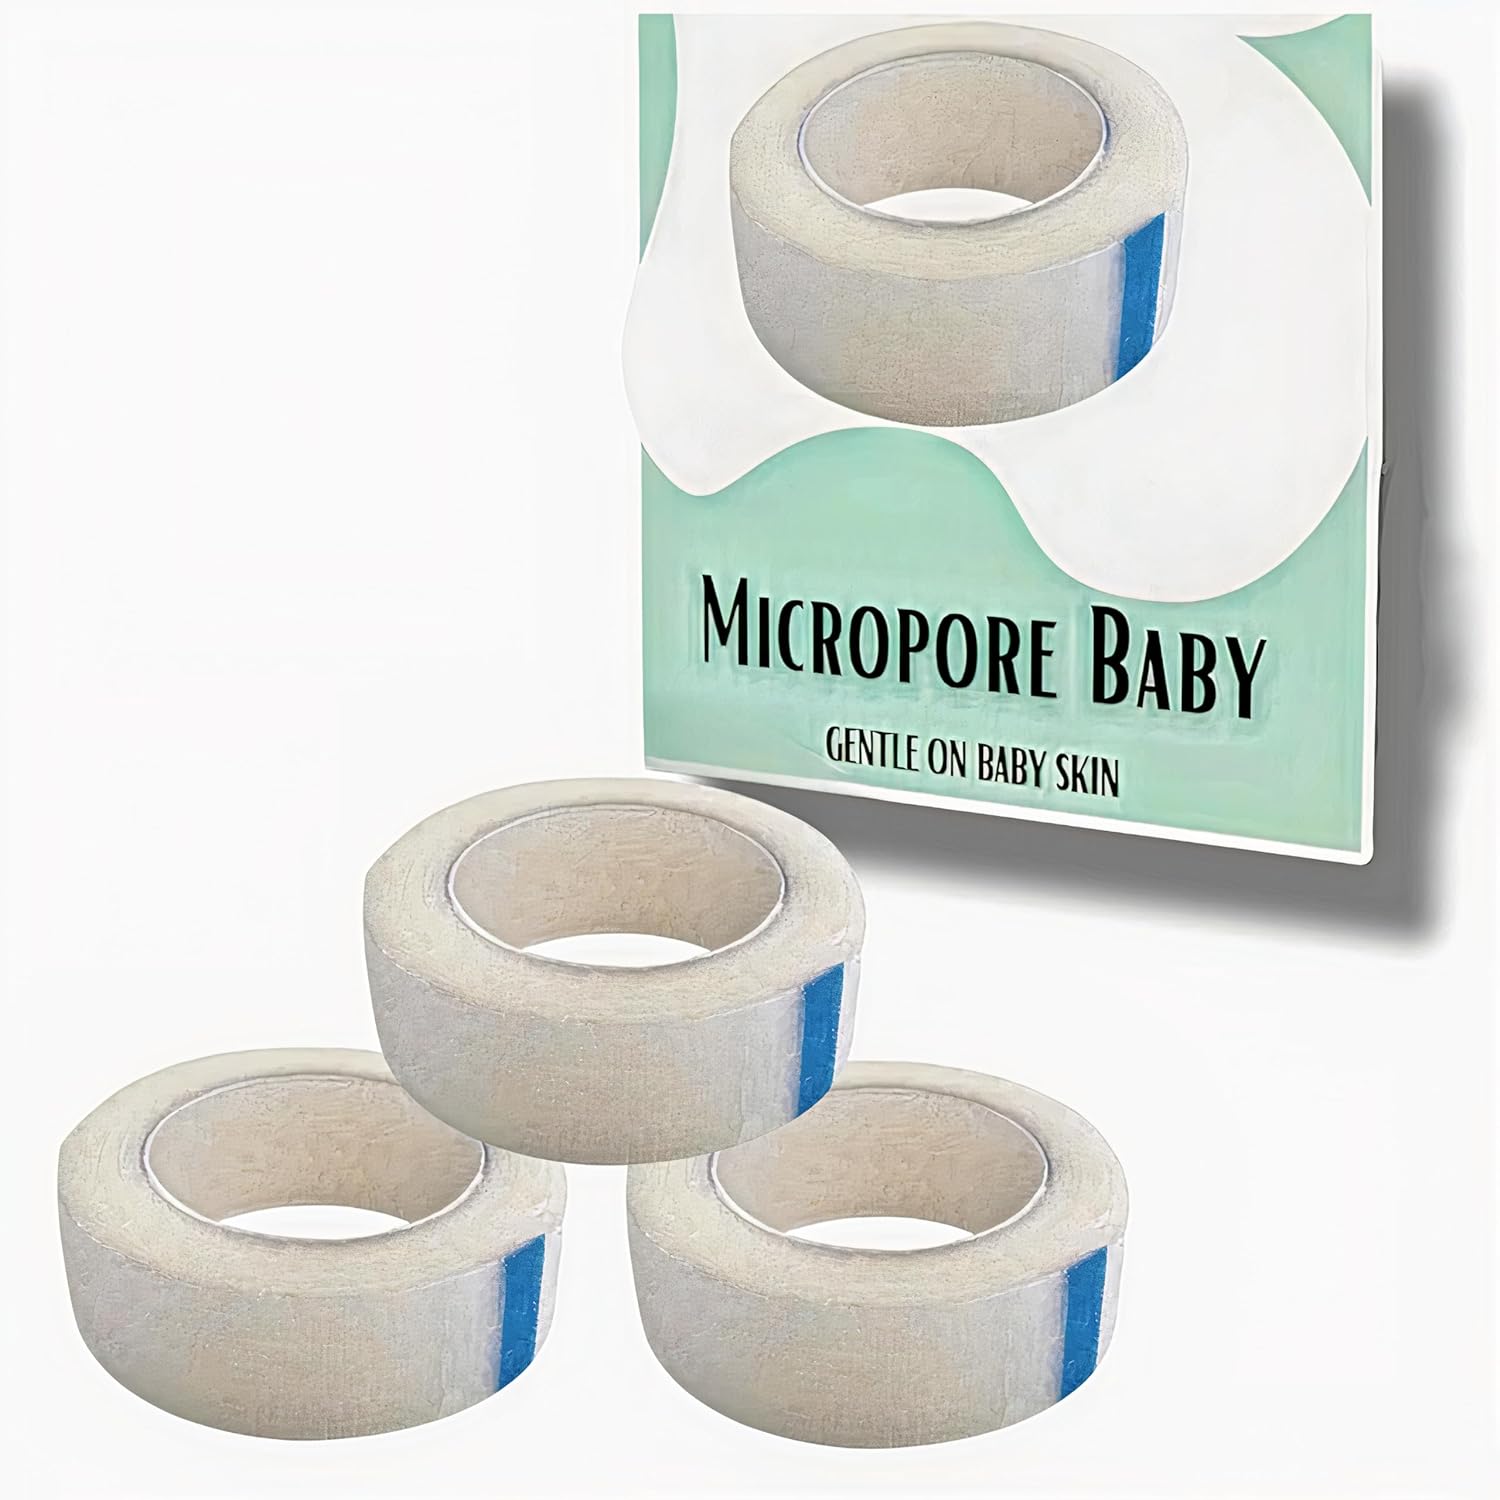 [ KIt 3 ] Micropore Skin Tape Baby | Protect Your Infant’s Sensitive Skin with Our Medical Tape Sensitive Skin and Medical Tape for Wound Care for Baby 1/2 inch & 10 yardas